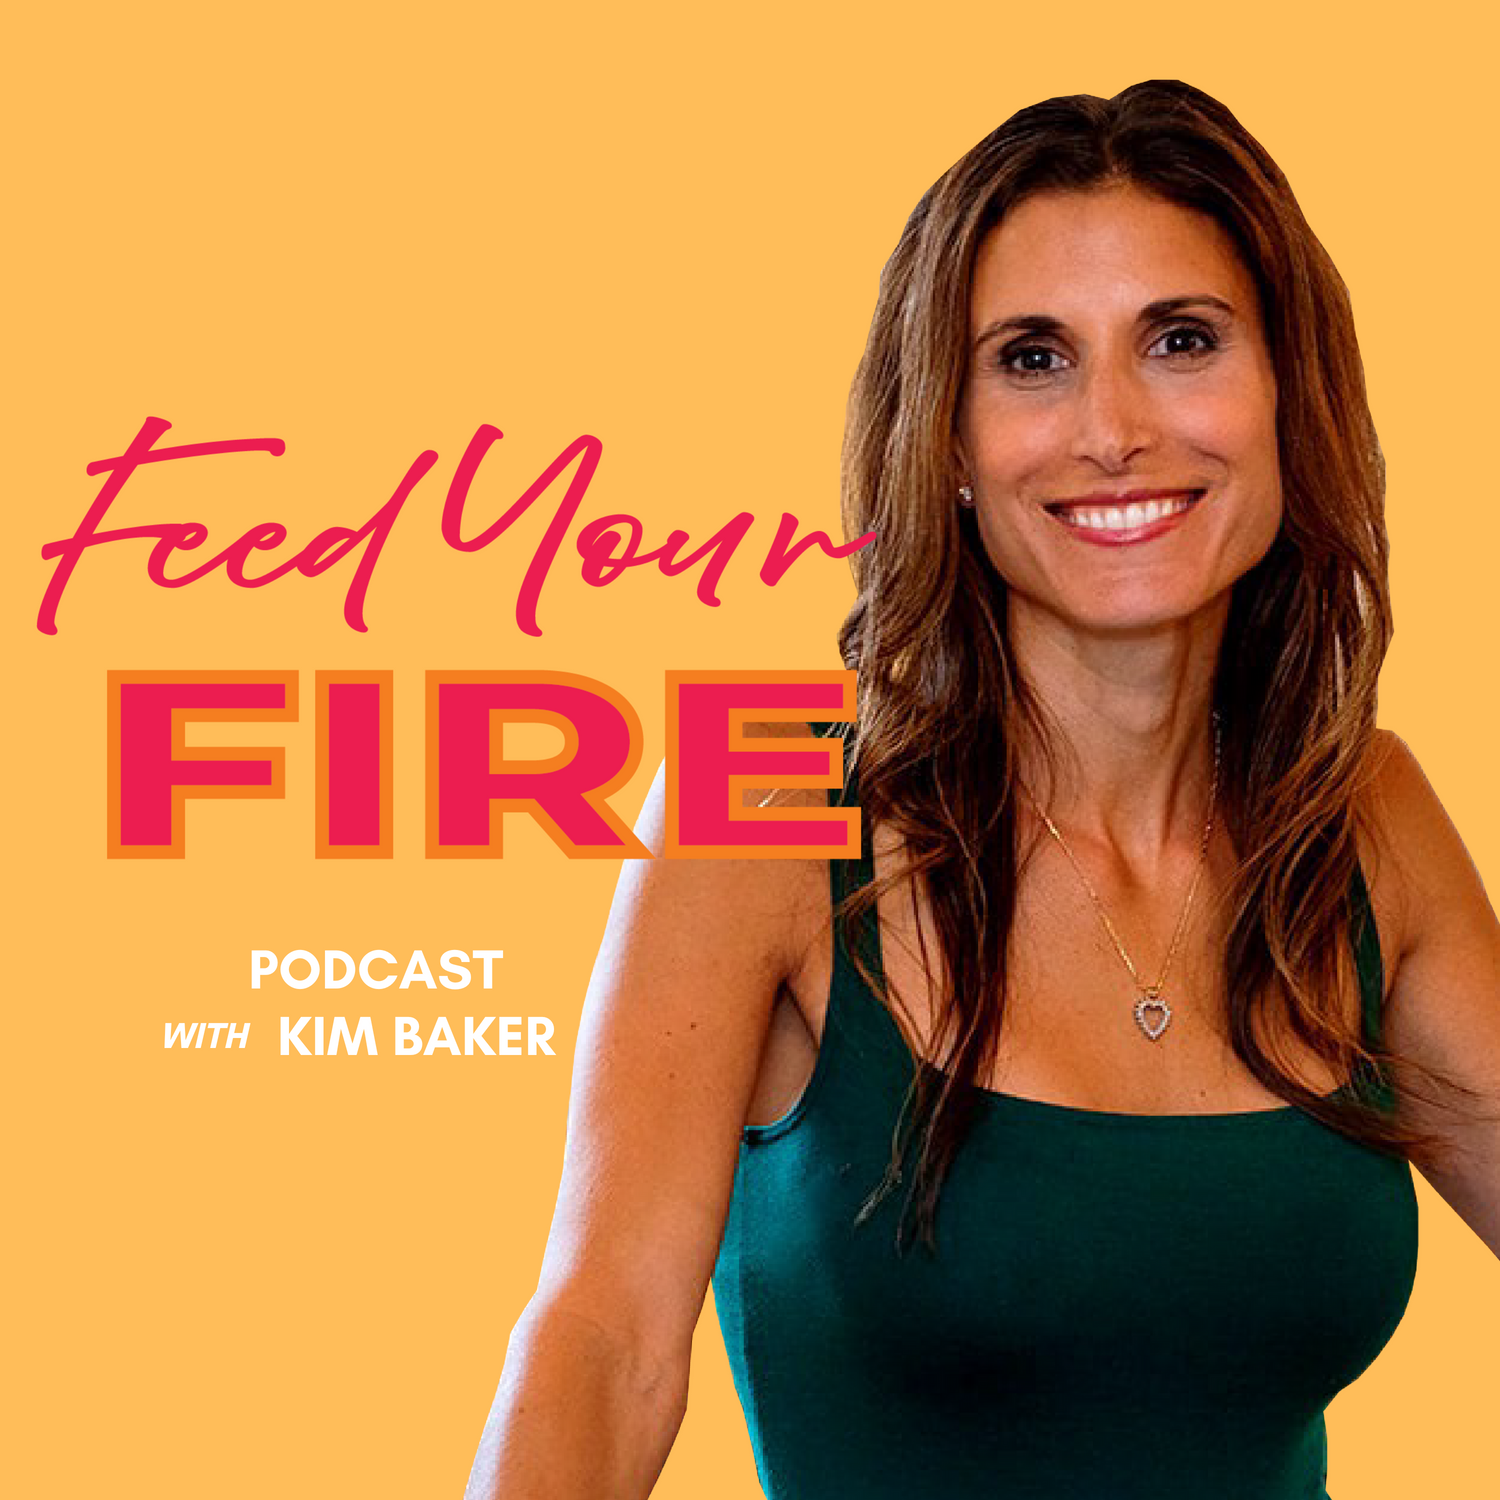 Feed Your Fire Podcast on Apple Podcasts and Spotify. Lifestyle and health, self-help and food